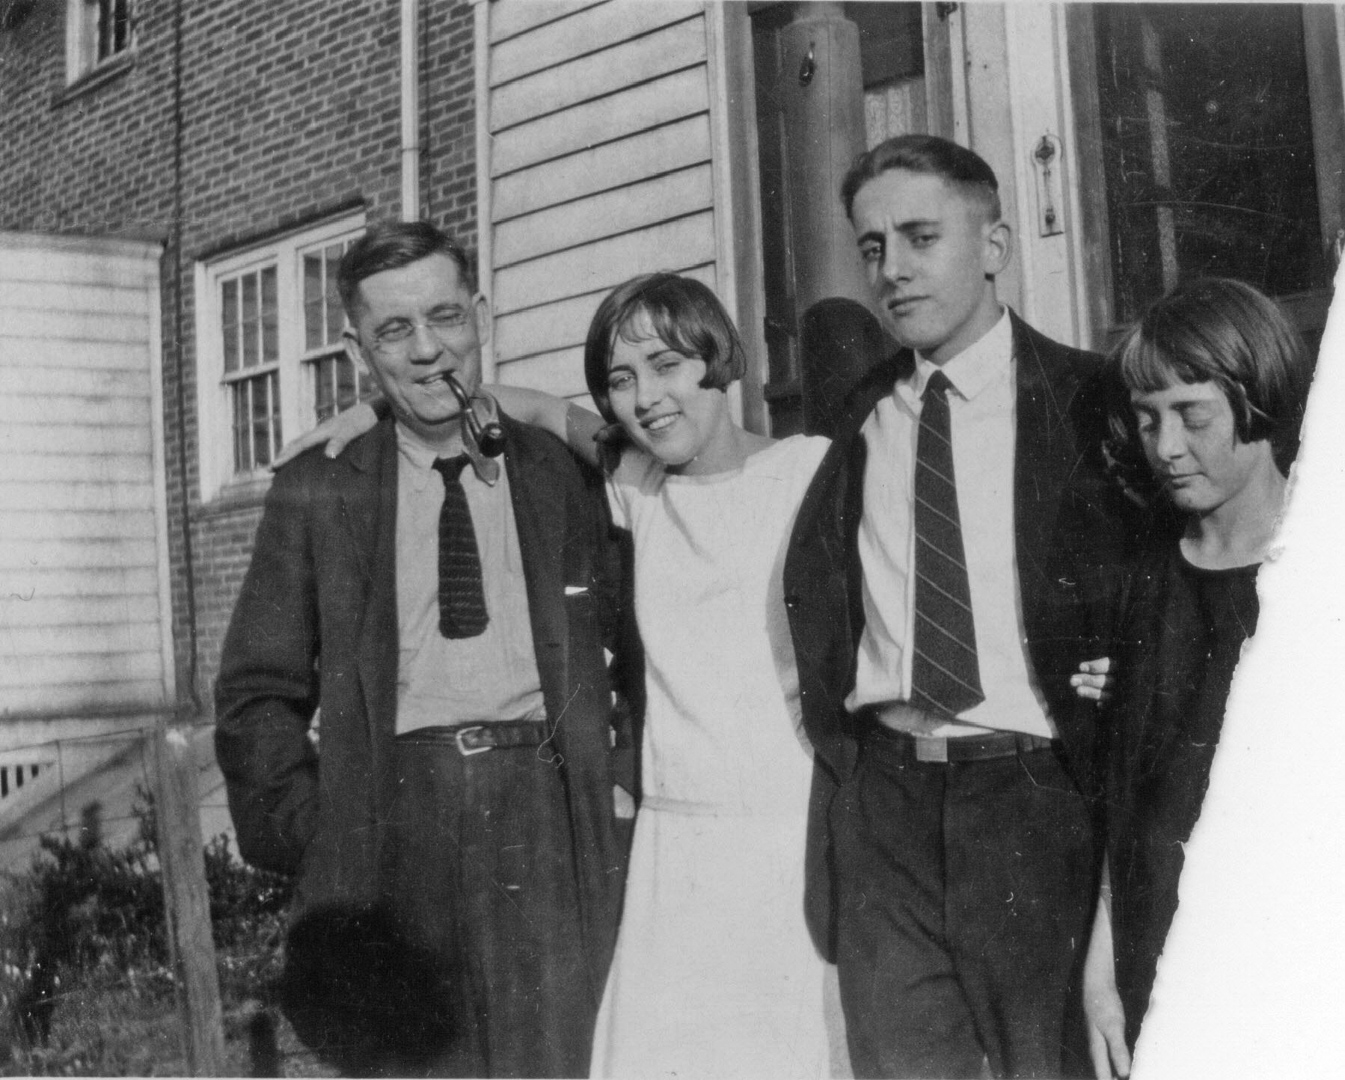 Edward Lawrence Fitzgerald with children Rose, John Edward & Thelma (Erie PA, probably early 1920s)